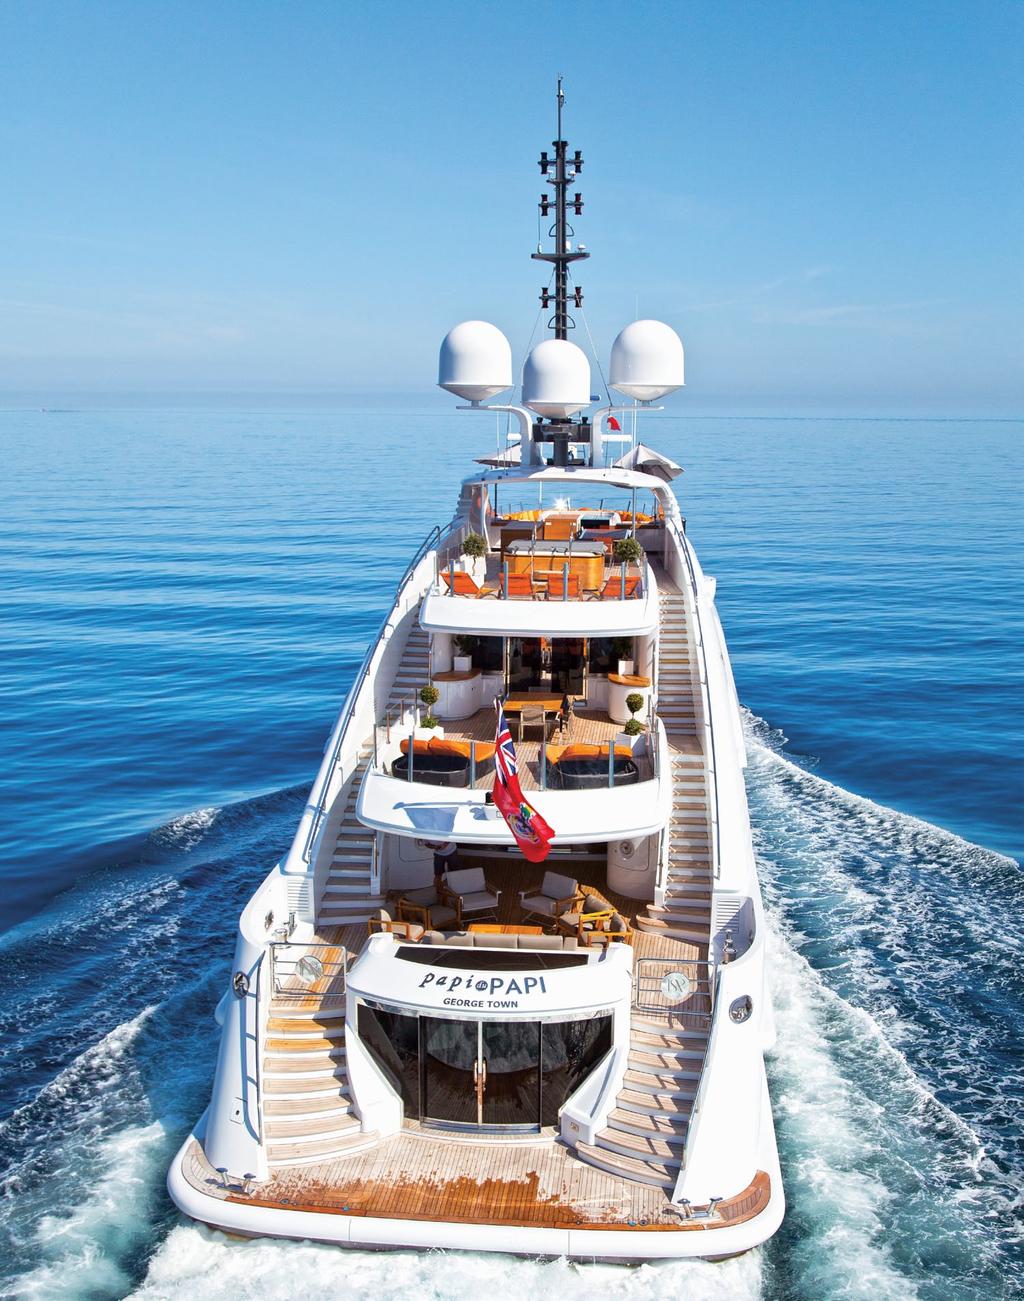 PLEASURE MEETS PASSION magazine brings the pleasure and passion of worldwide luxury yachting home to American yachtsmen interested in purchasing the next yacht of their dreams.